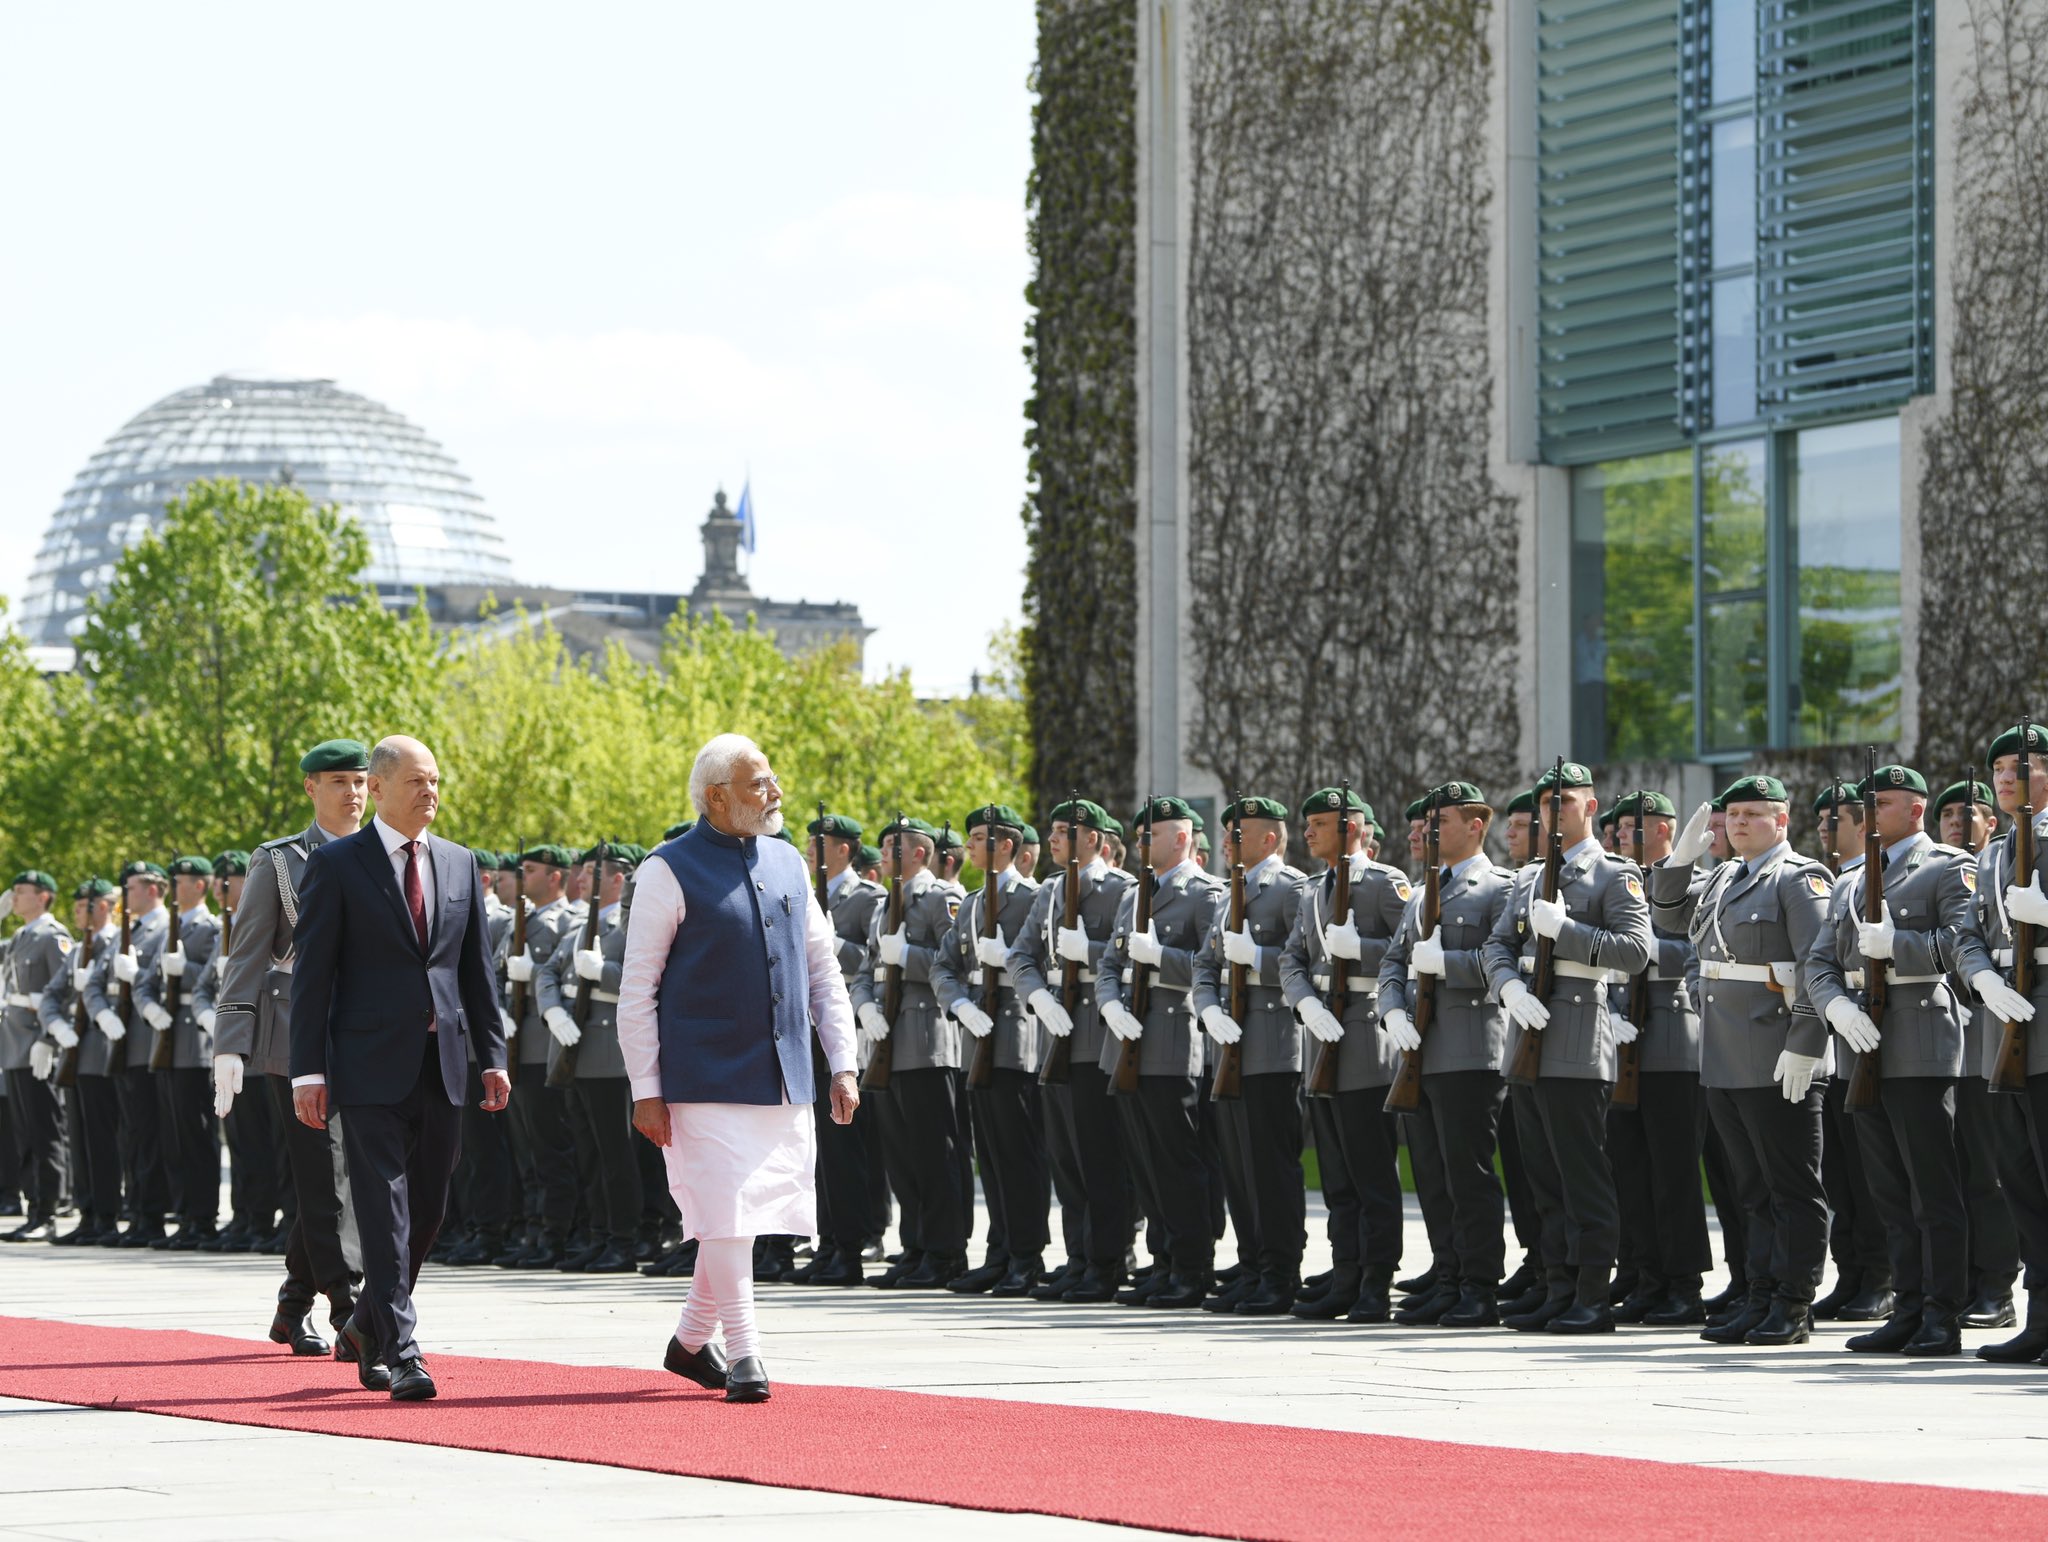 No country will be victorious in Russia-Ukraine war: PM Modi after talks with German Chancellor